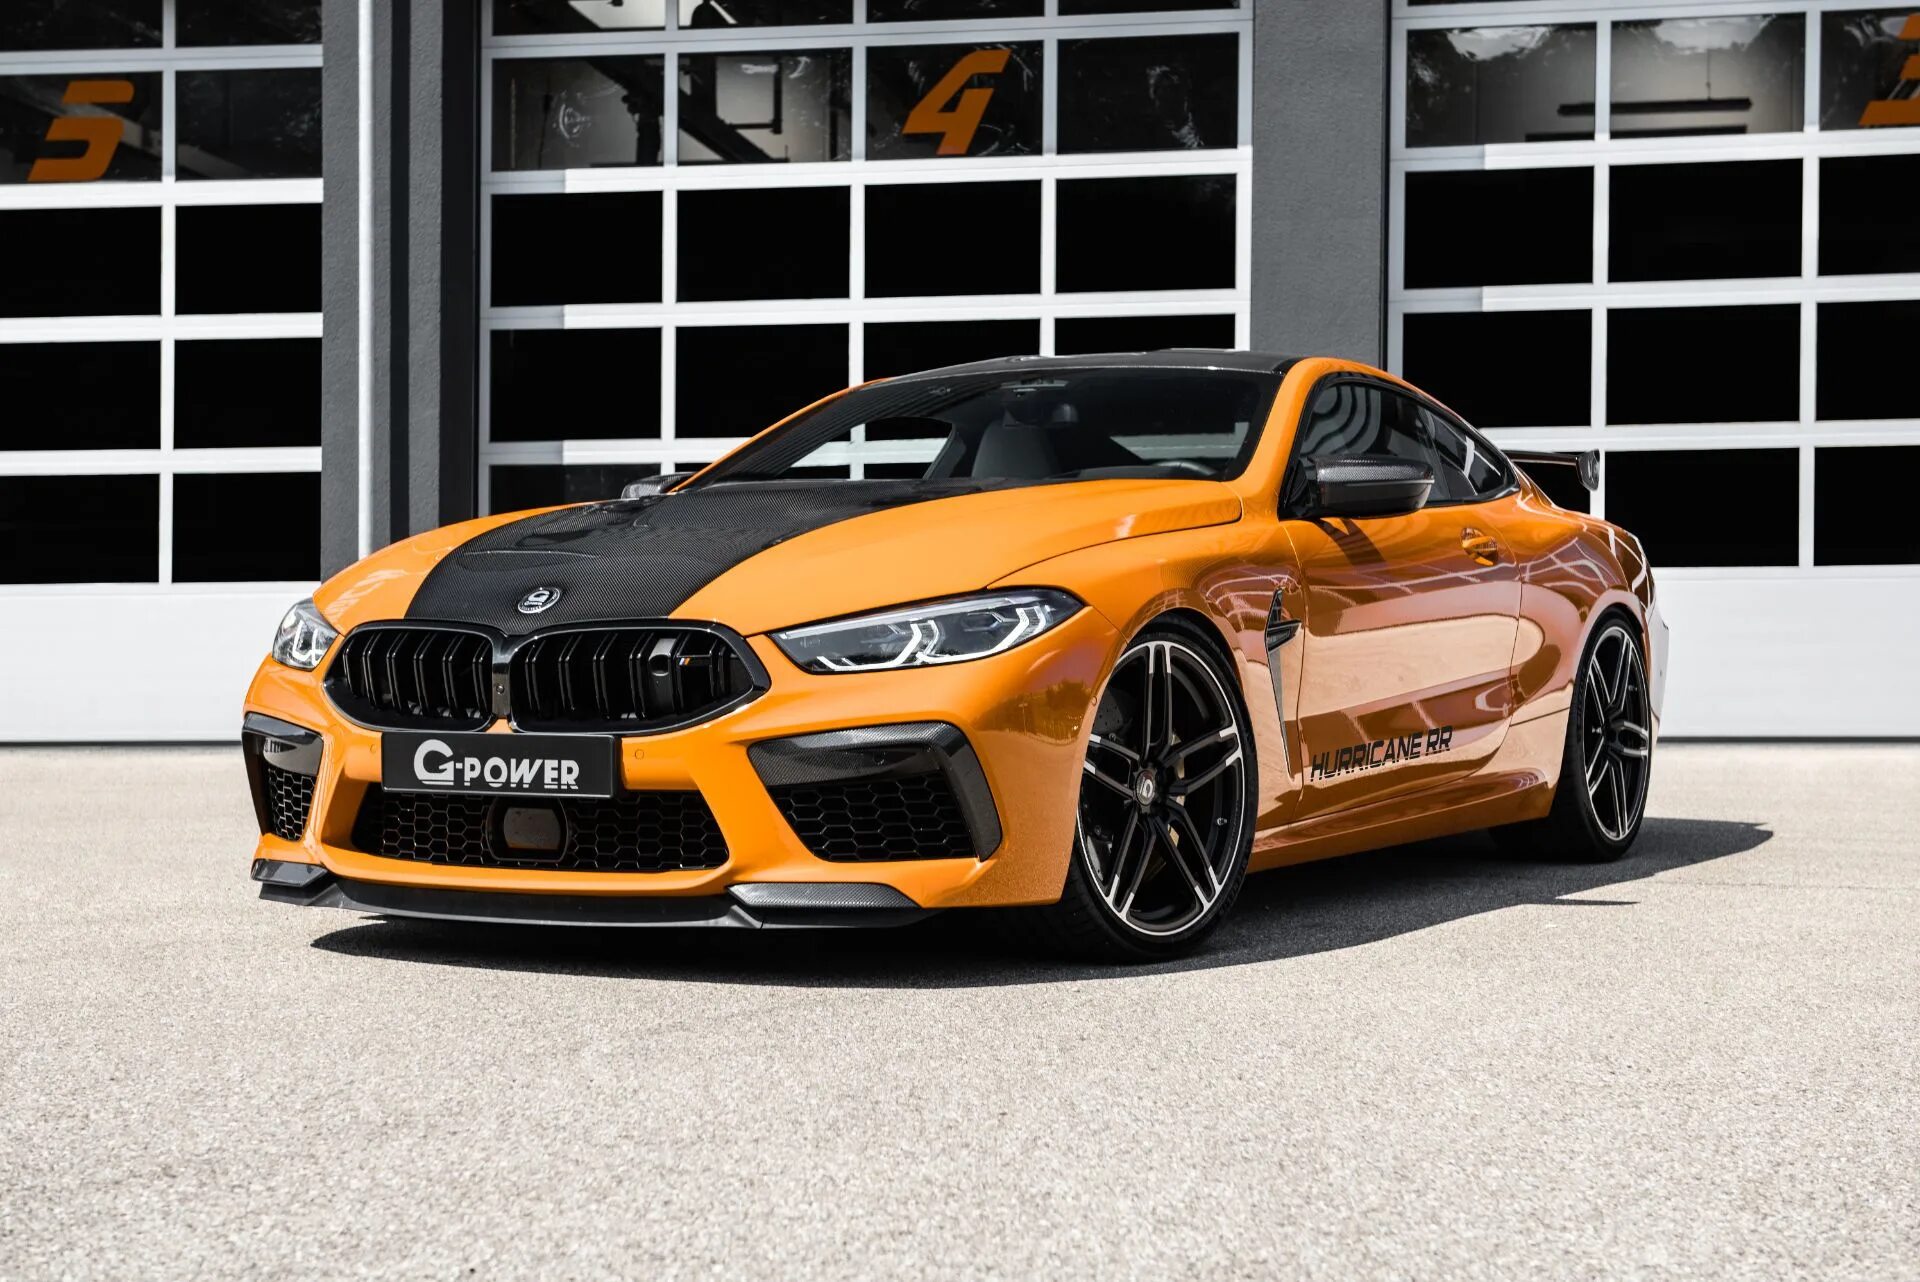 BMW m8 Competition g Power. BMW m6 v10 g Power. G-Power BMW m6 Hurricane RR. BMW m6 g-Power Hurricane. Power tuning